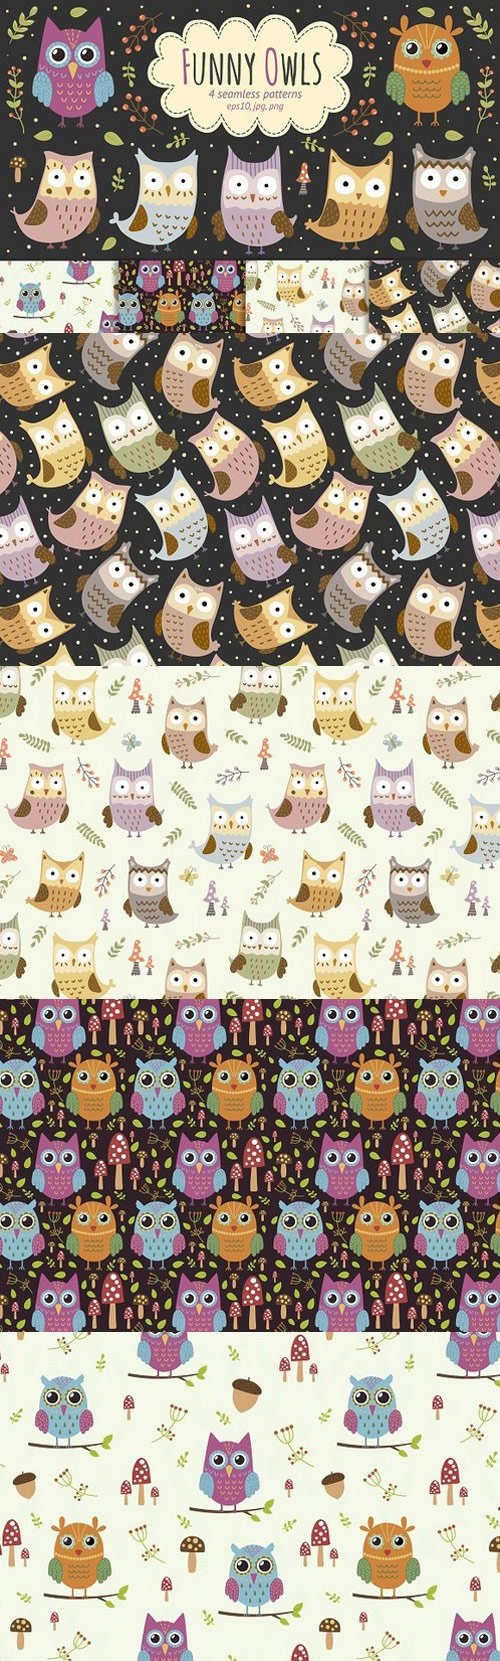 Funny Owls: 4 seamless patterns 924232